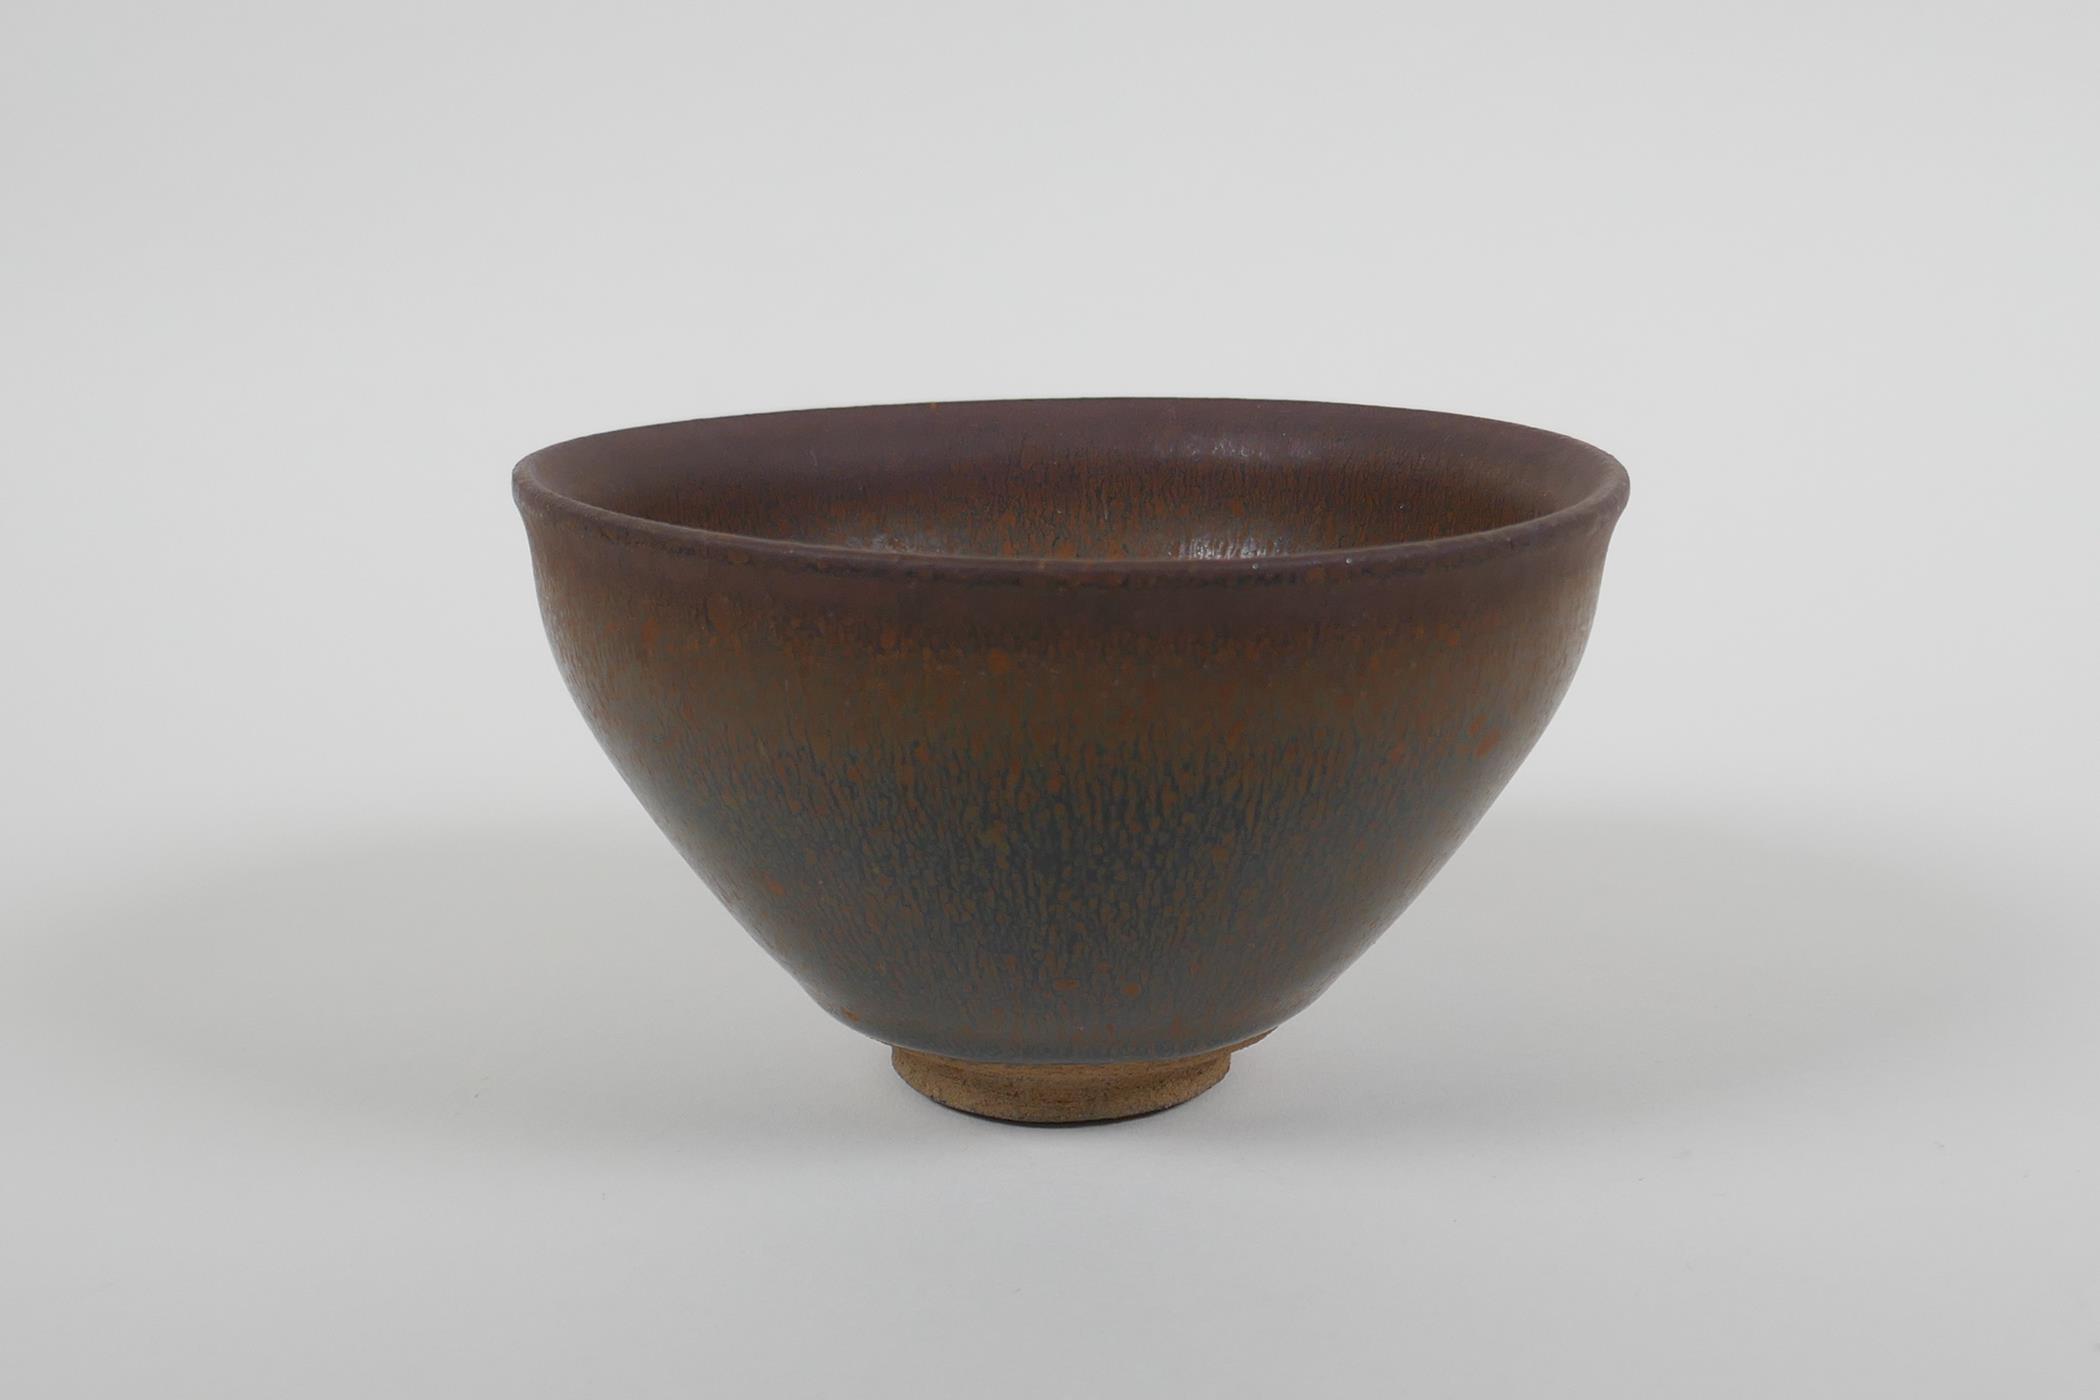 A Chinese Jian ware bowl with hares fur glaze, 2 character mark to base, 12cm diameter